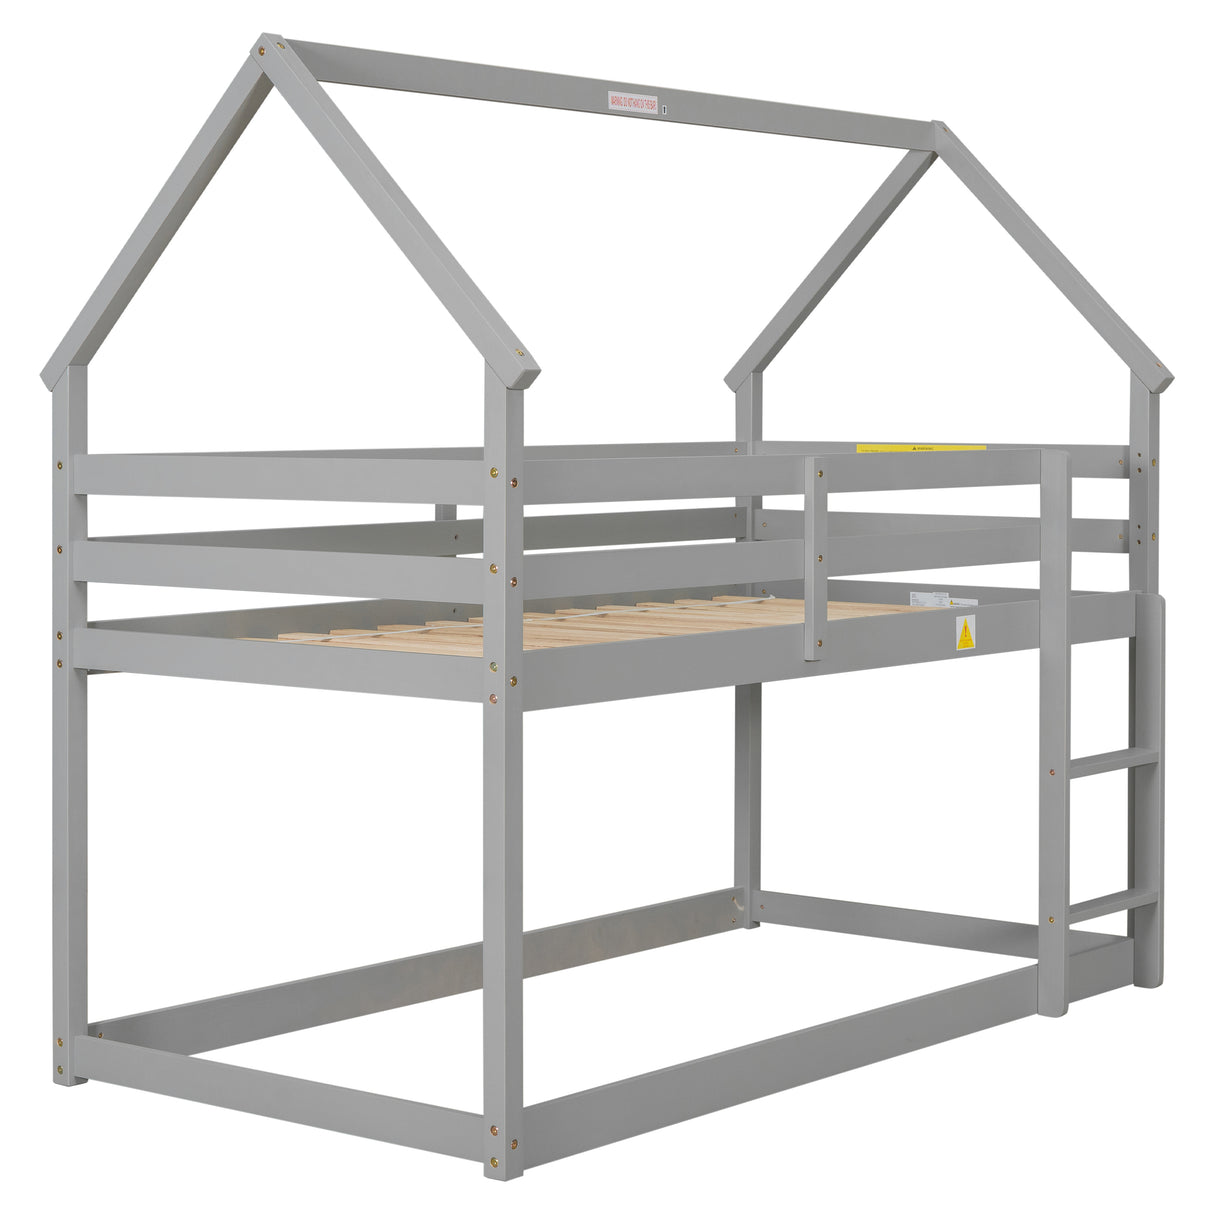 Twin over Twin Loft Bed with Roof Design, Safety Guardrail, Ladder, Grey - Home Elegance USA